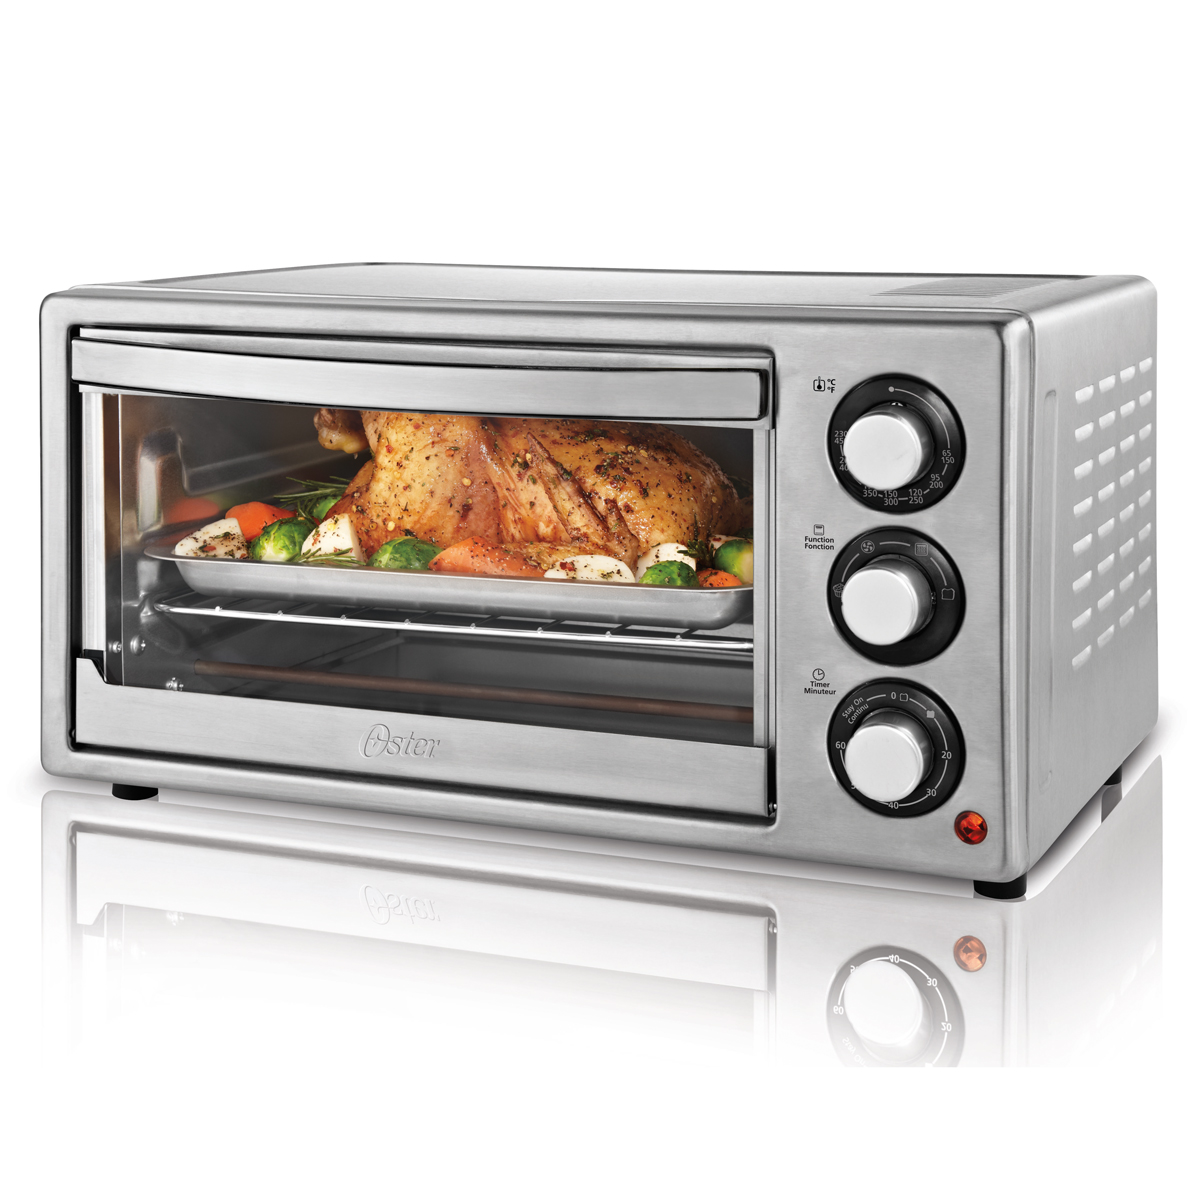 Oster 6 Slice Convection Countertop Oven Stainless Steel